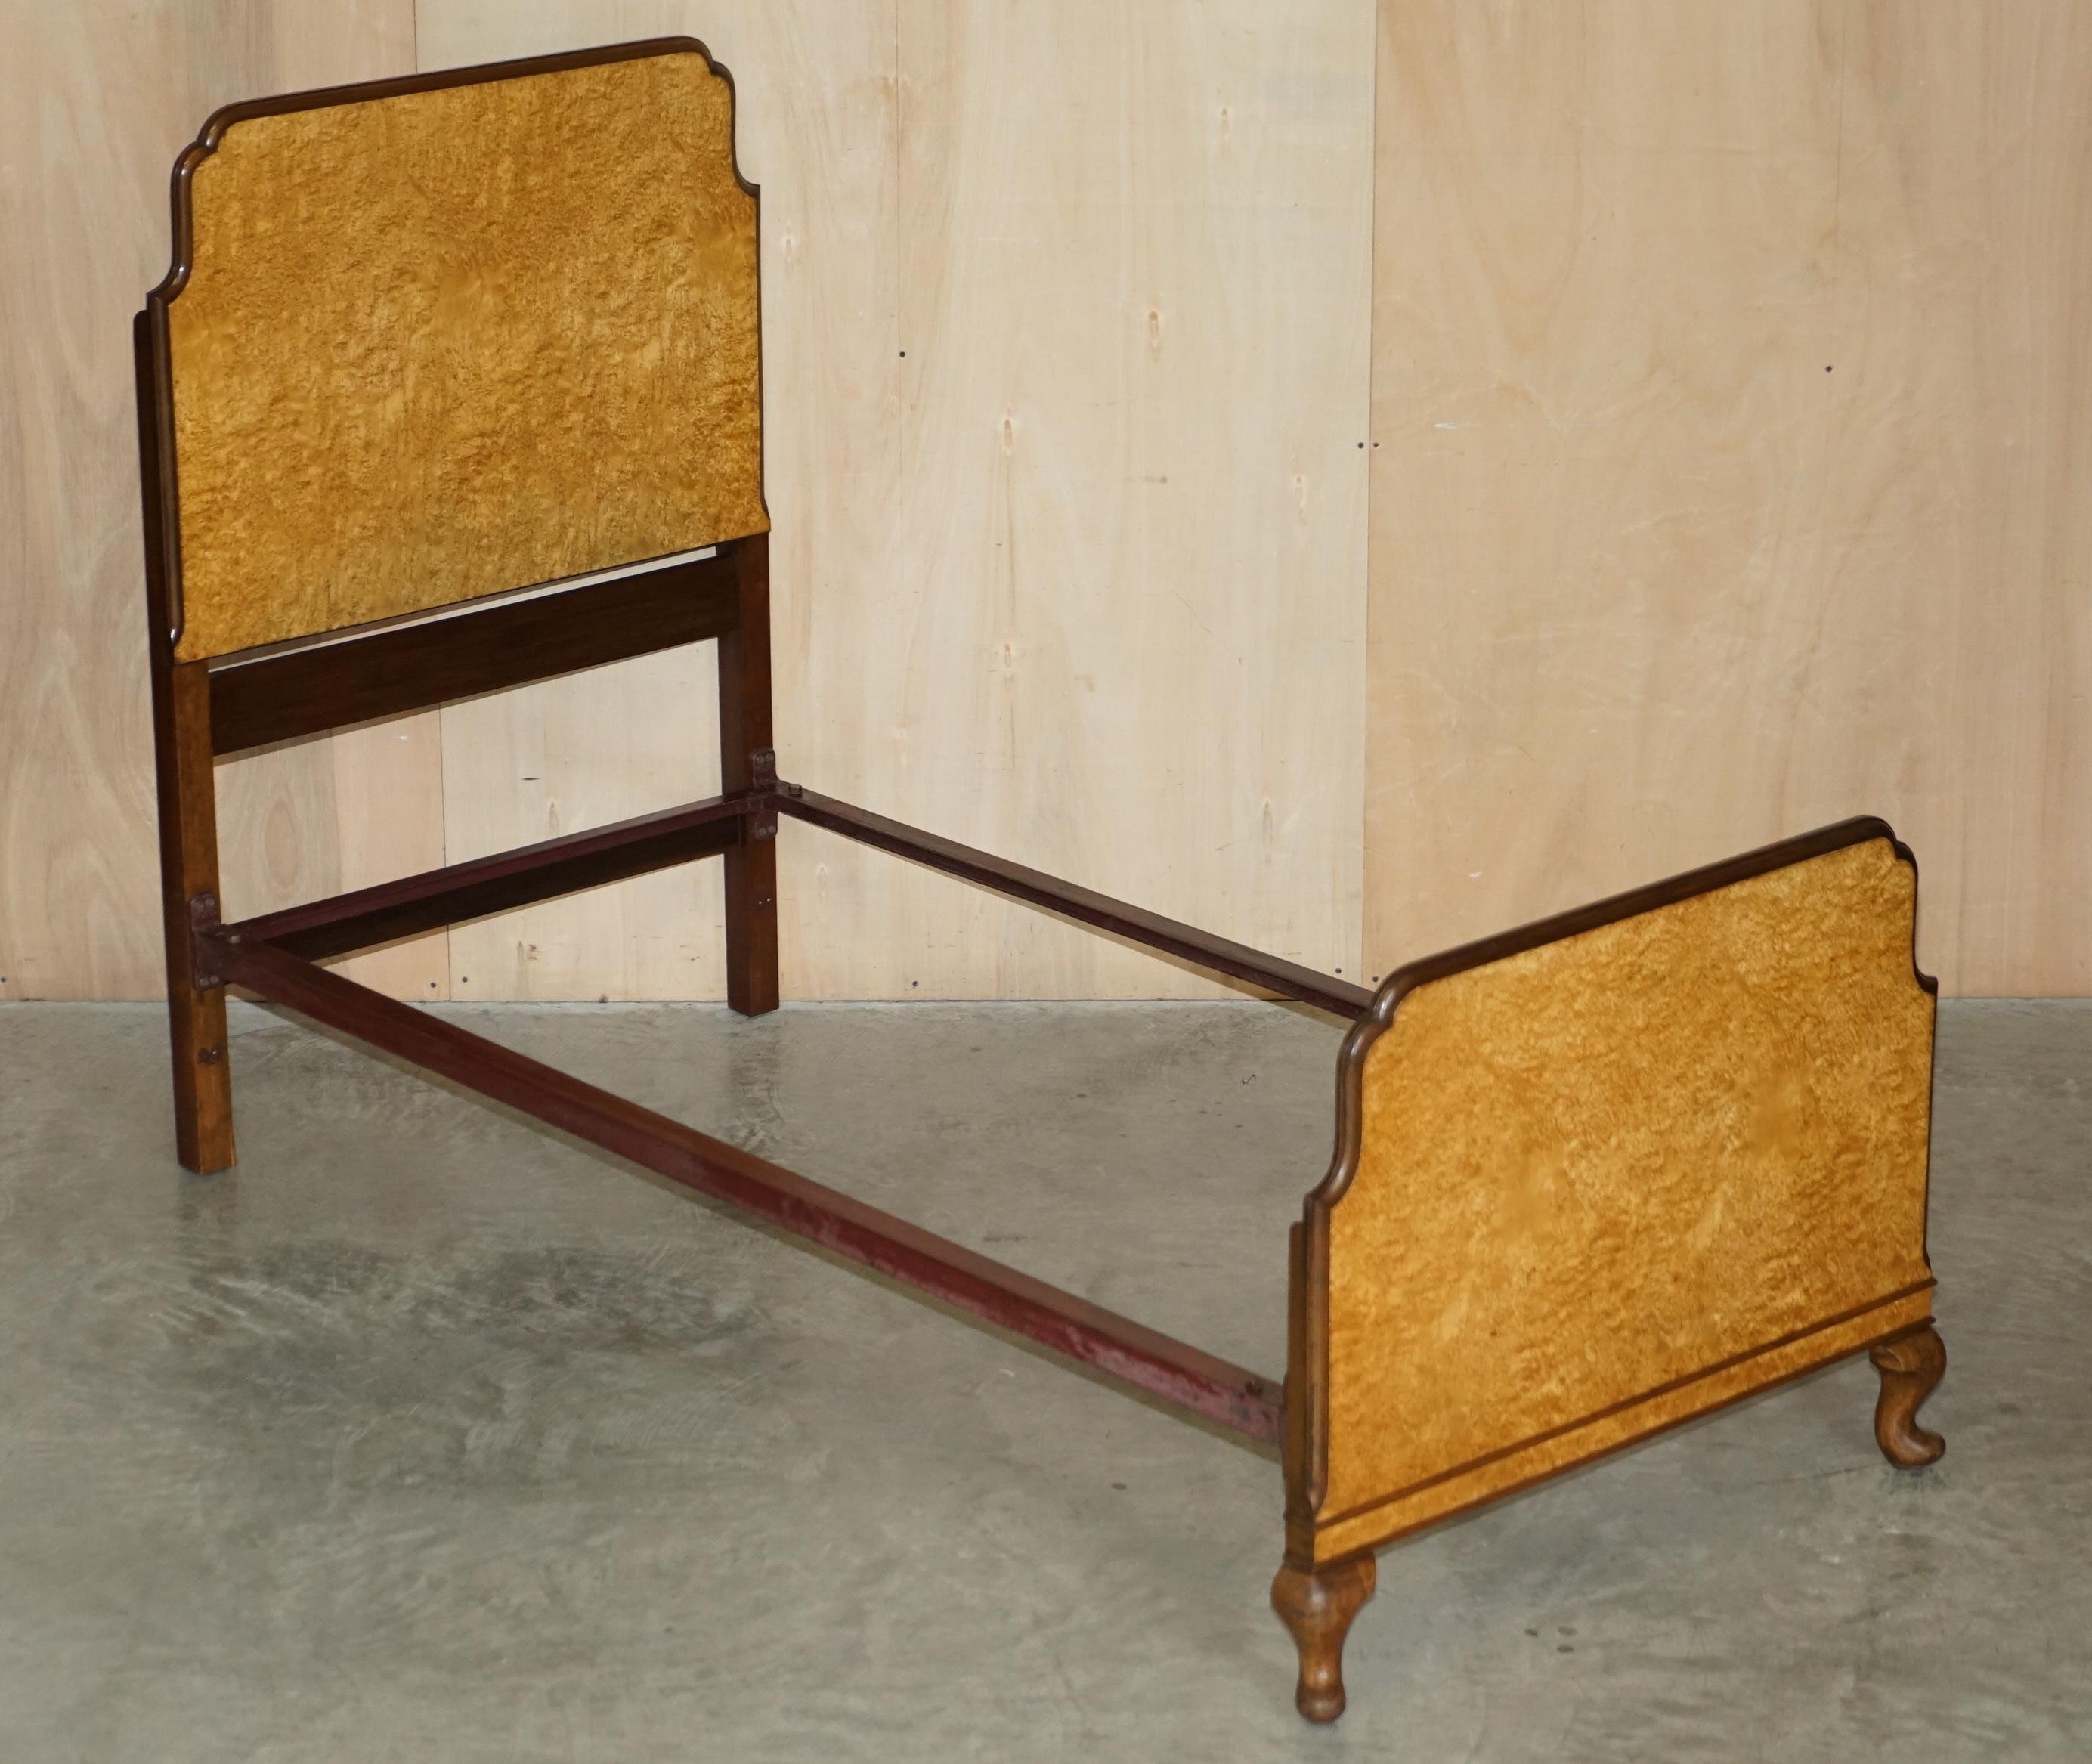 We are delighted to offer for sale this stunning pair of circa 1900 Birds Eye Maple single beds frames with Vono rails

A lovely pair of original hand made in England Birds Eye maple bed frames. The timber grain and colour is sublime, they look